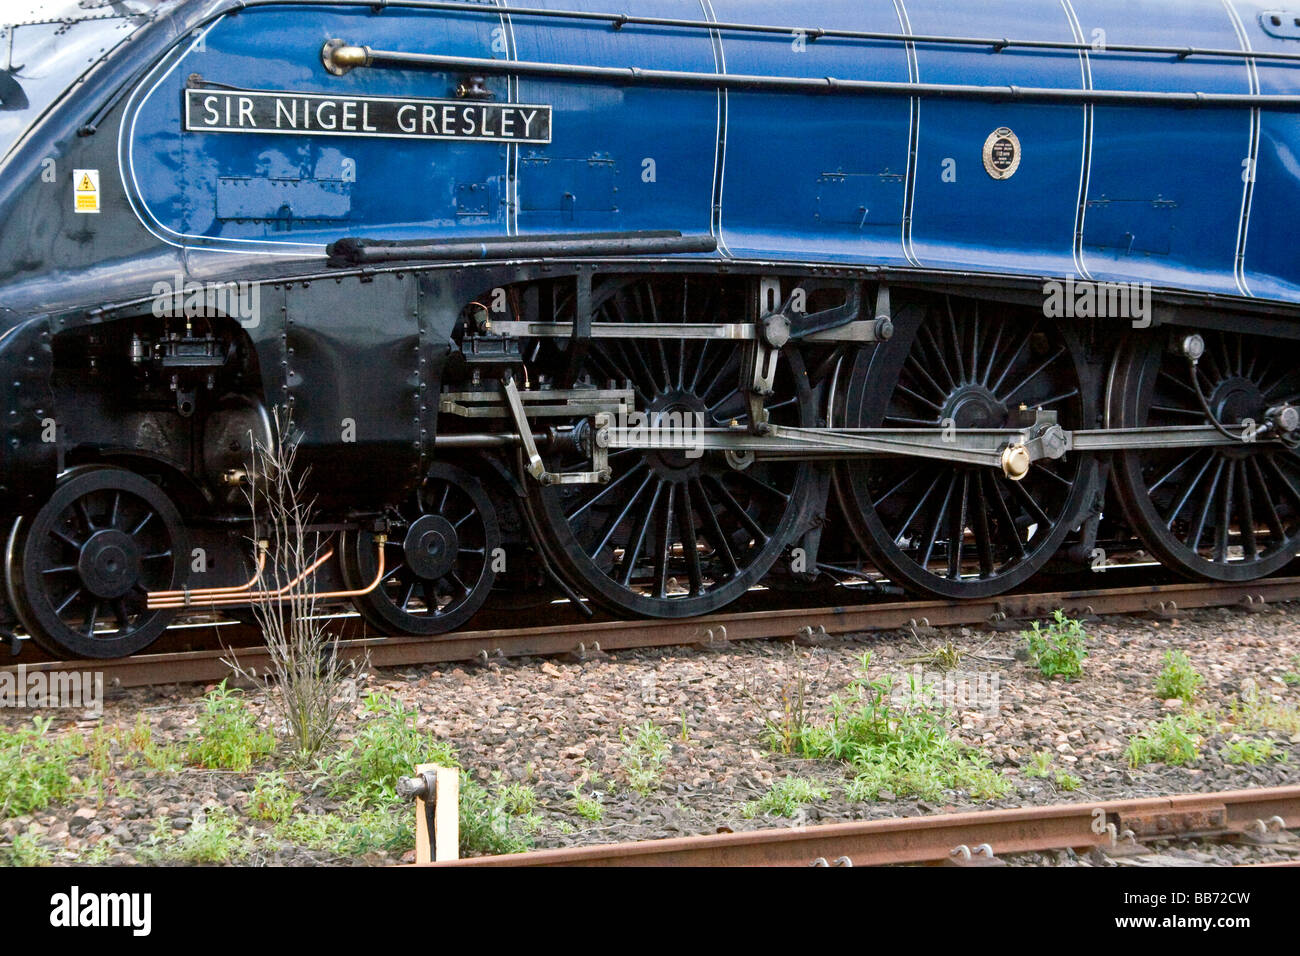 Sir Nigel Gresley class LNER A4 Pacific 60007 locomotive on show at Dundee train station UK Stock Photo